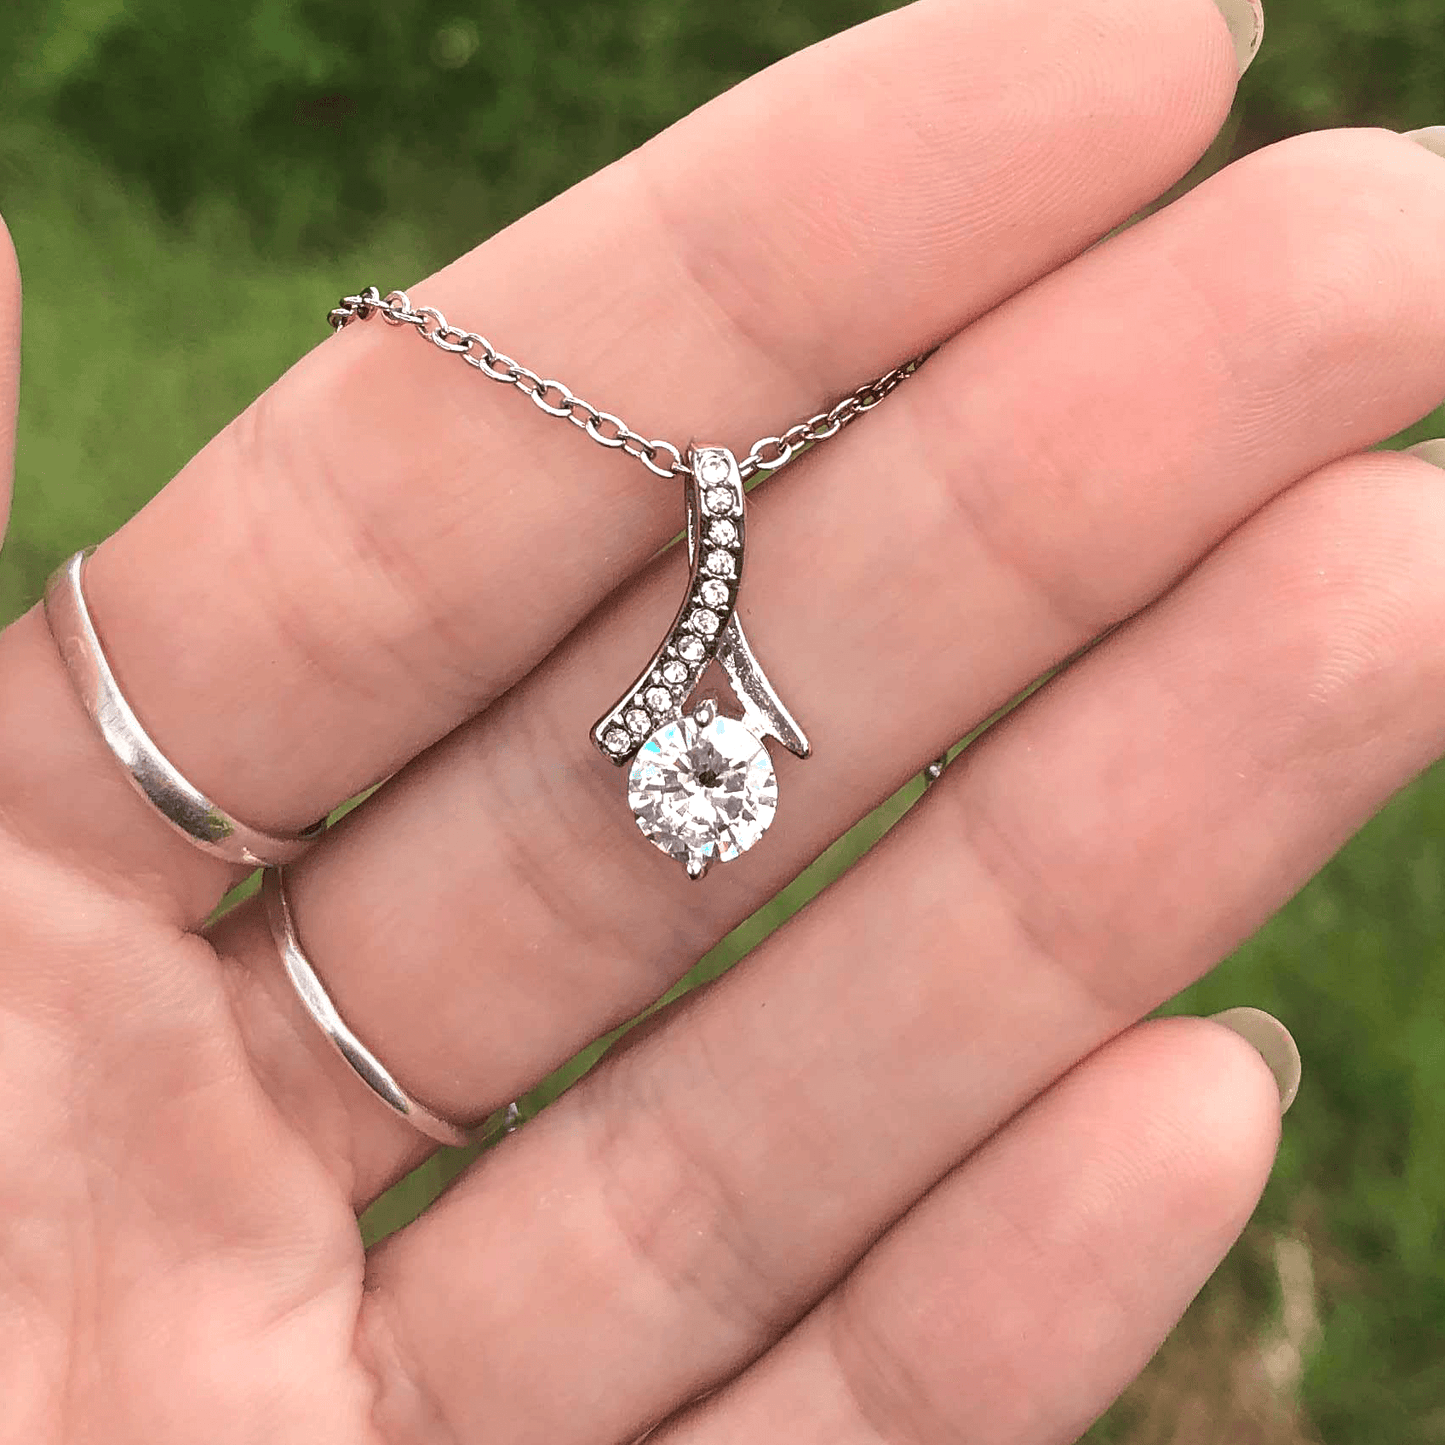 Mom - All My Heart - Alluring Necklace